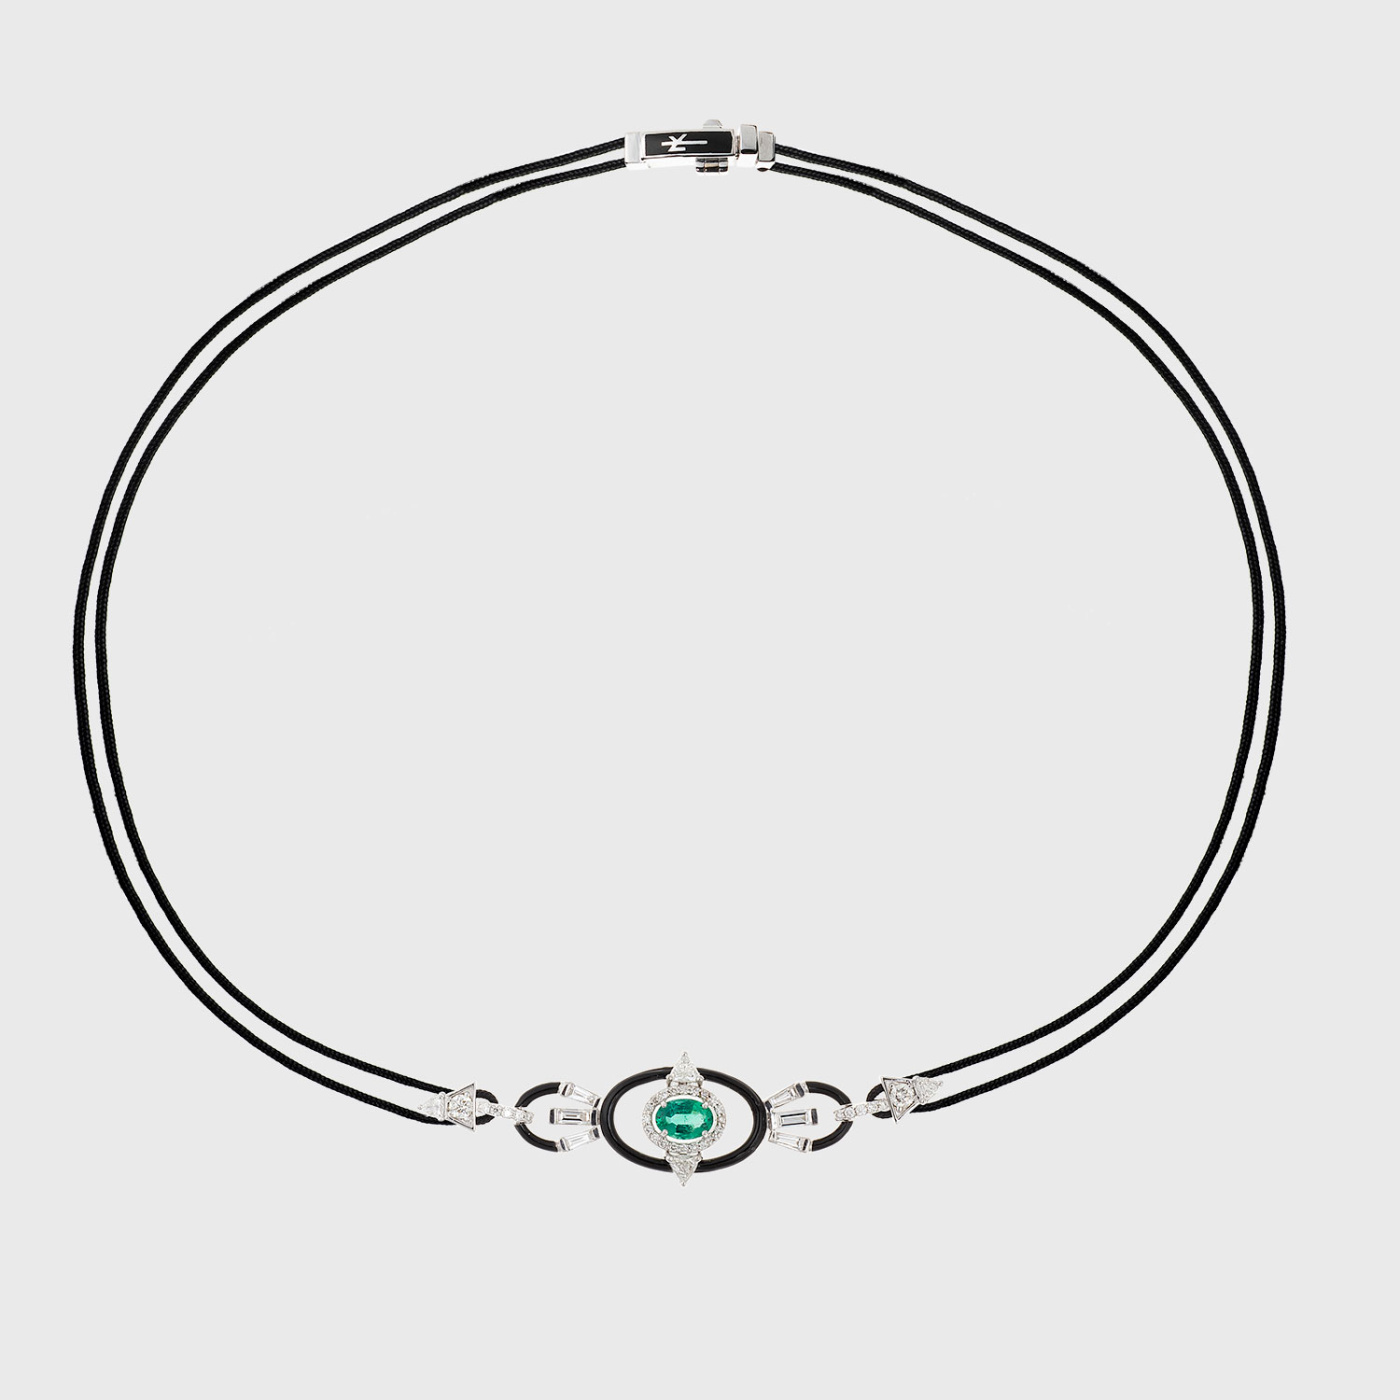 White gold cord necklace with emeralds, white diamonds and black enamel